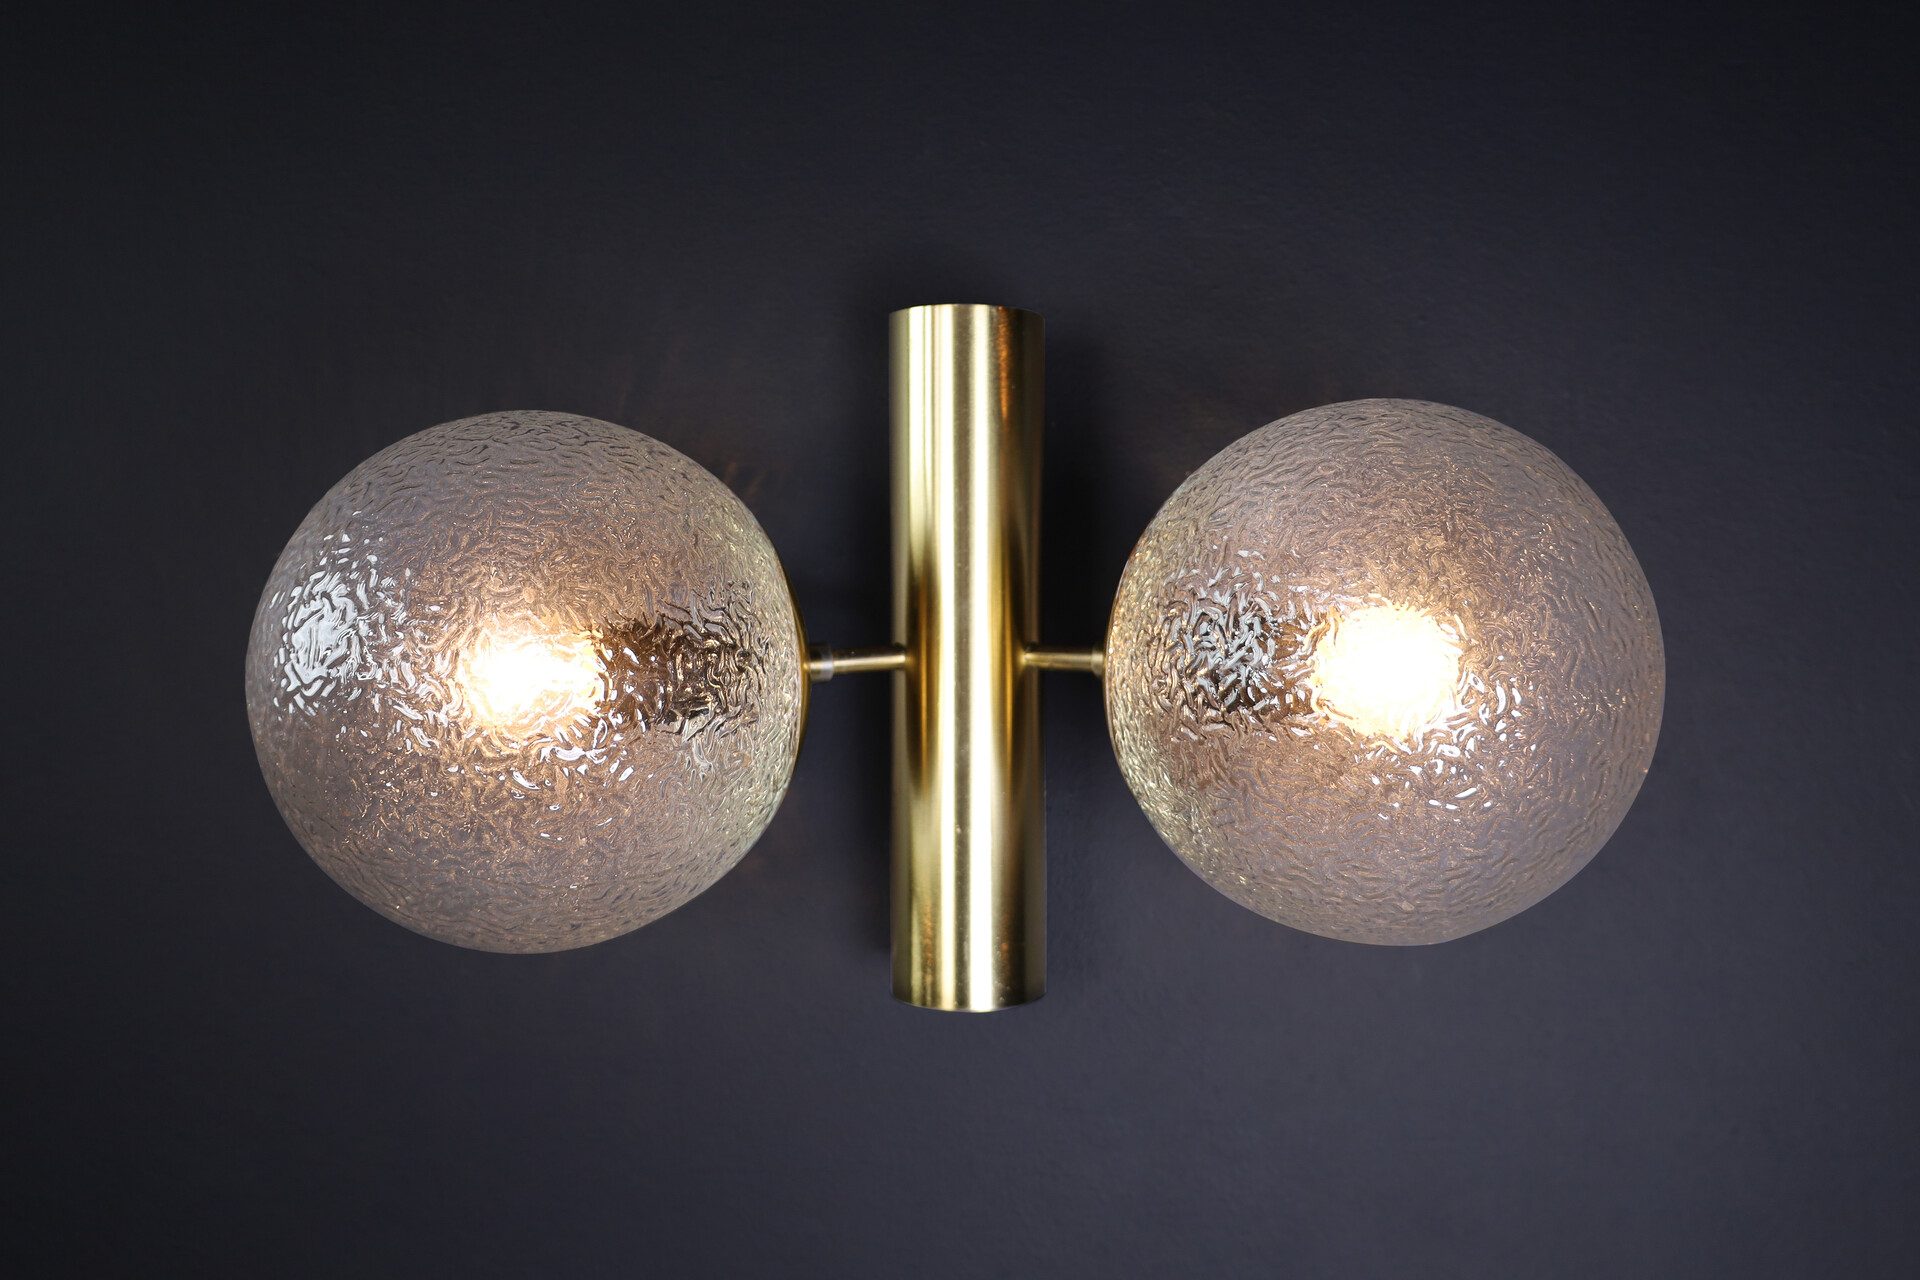 Mid century modern Bras and glass sconces, Germany 1960s Mid-20th century